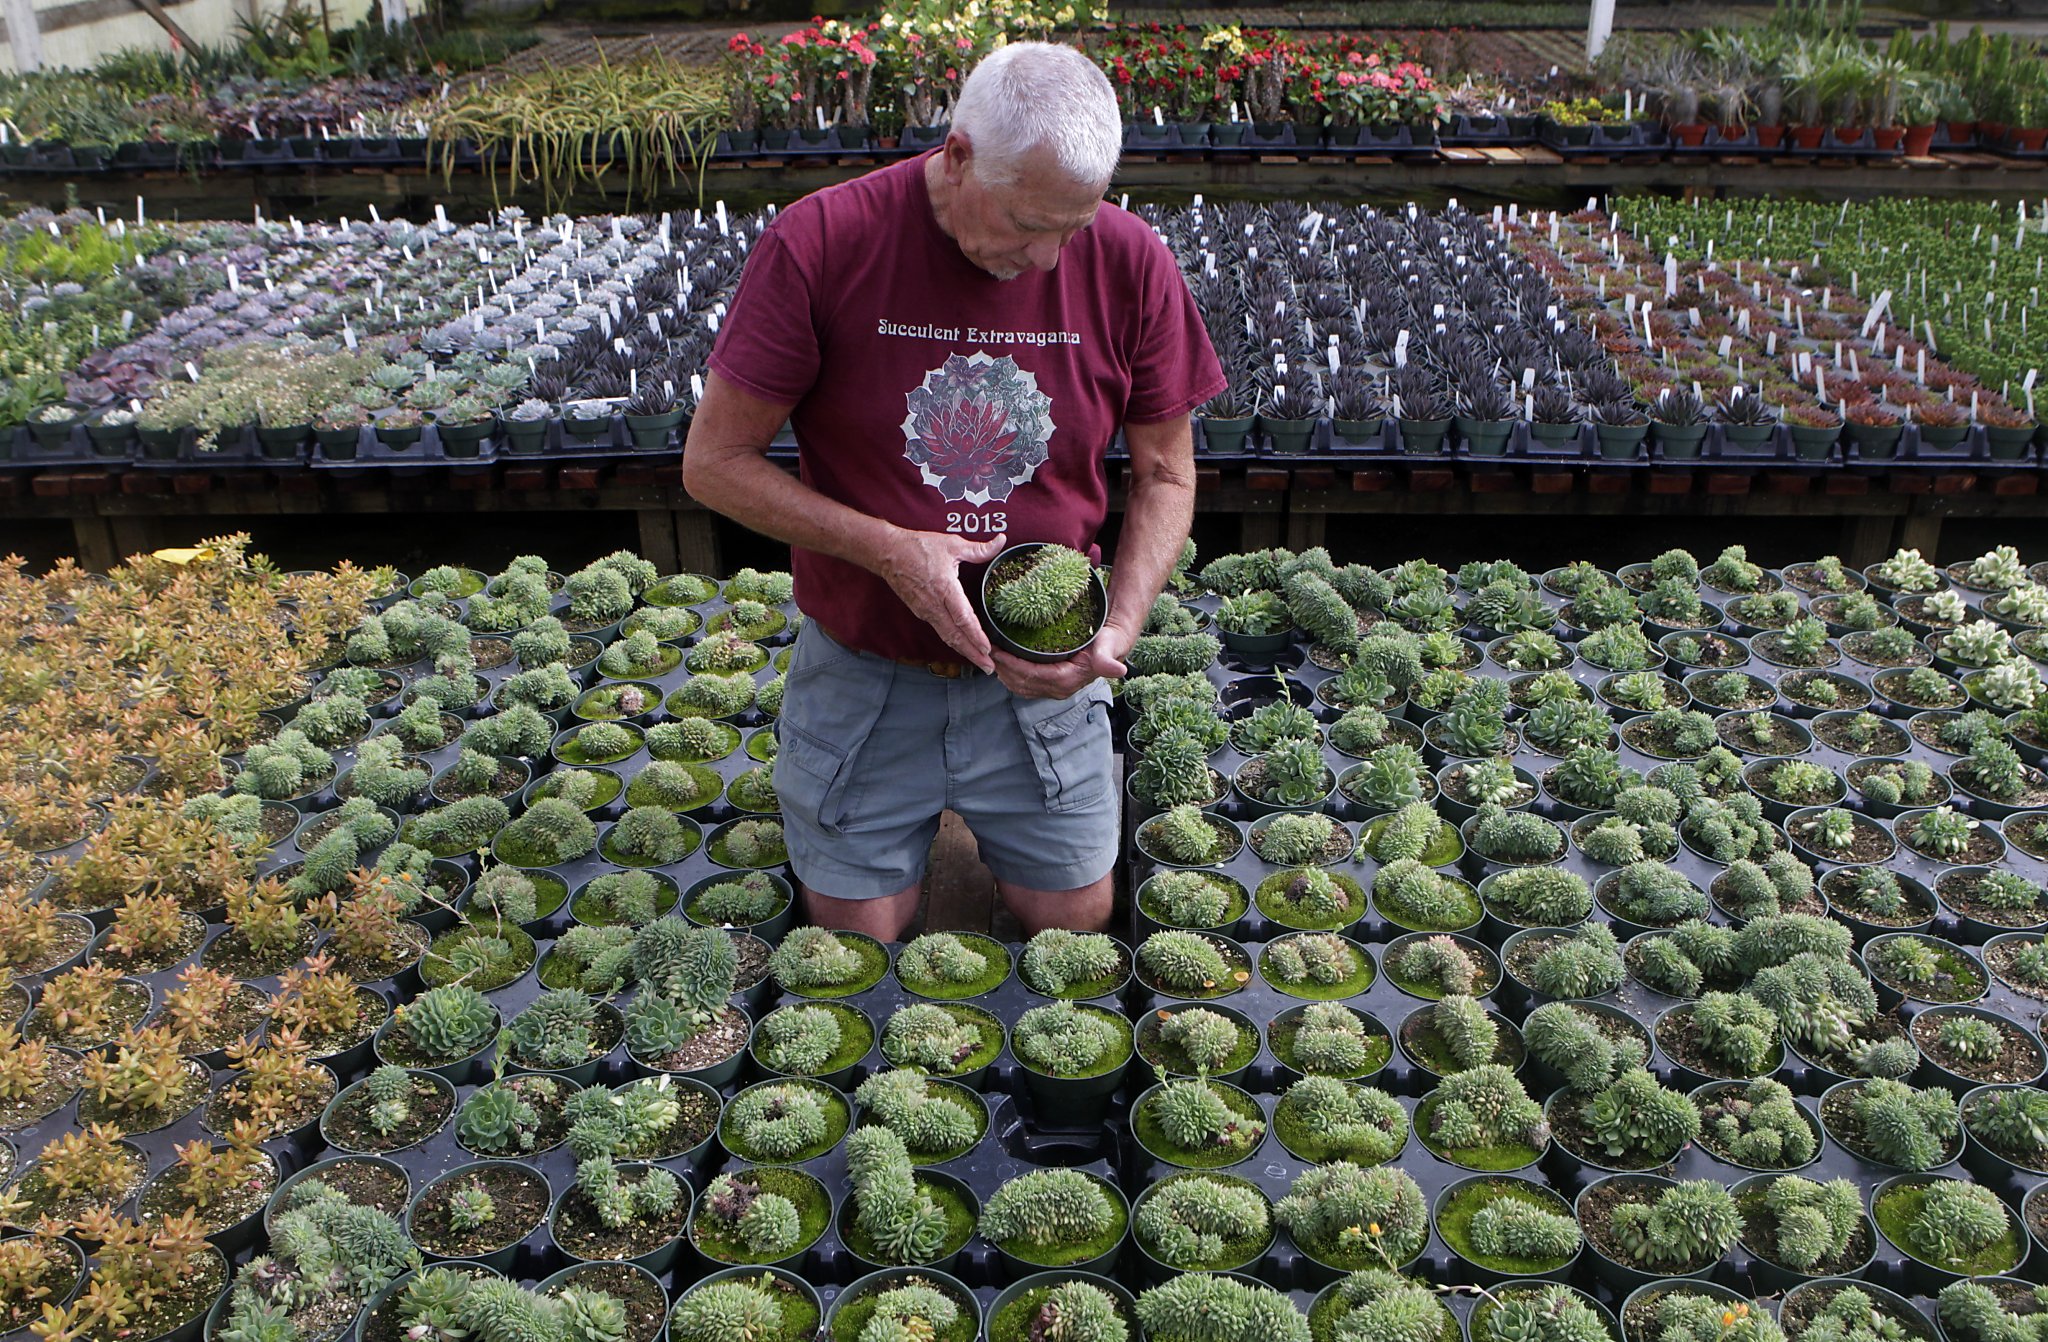 Succulent Gardens In Castroville Offers About 750 Varieties Sfgate